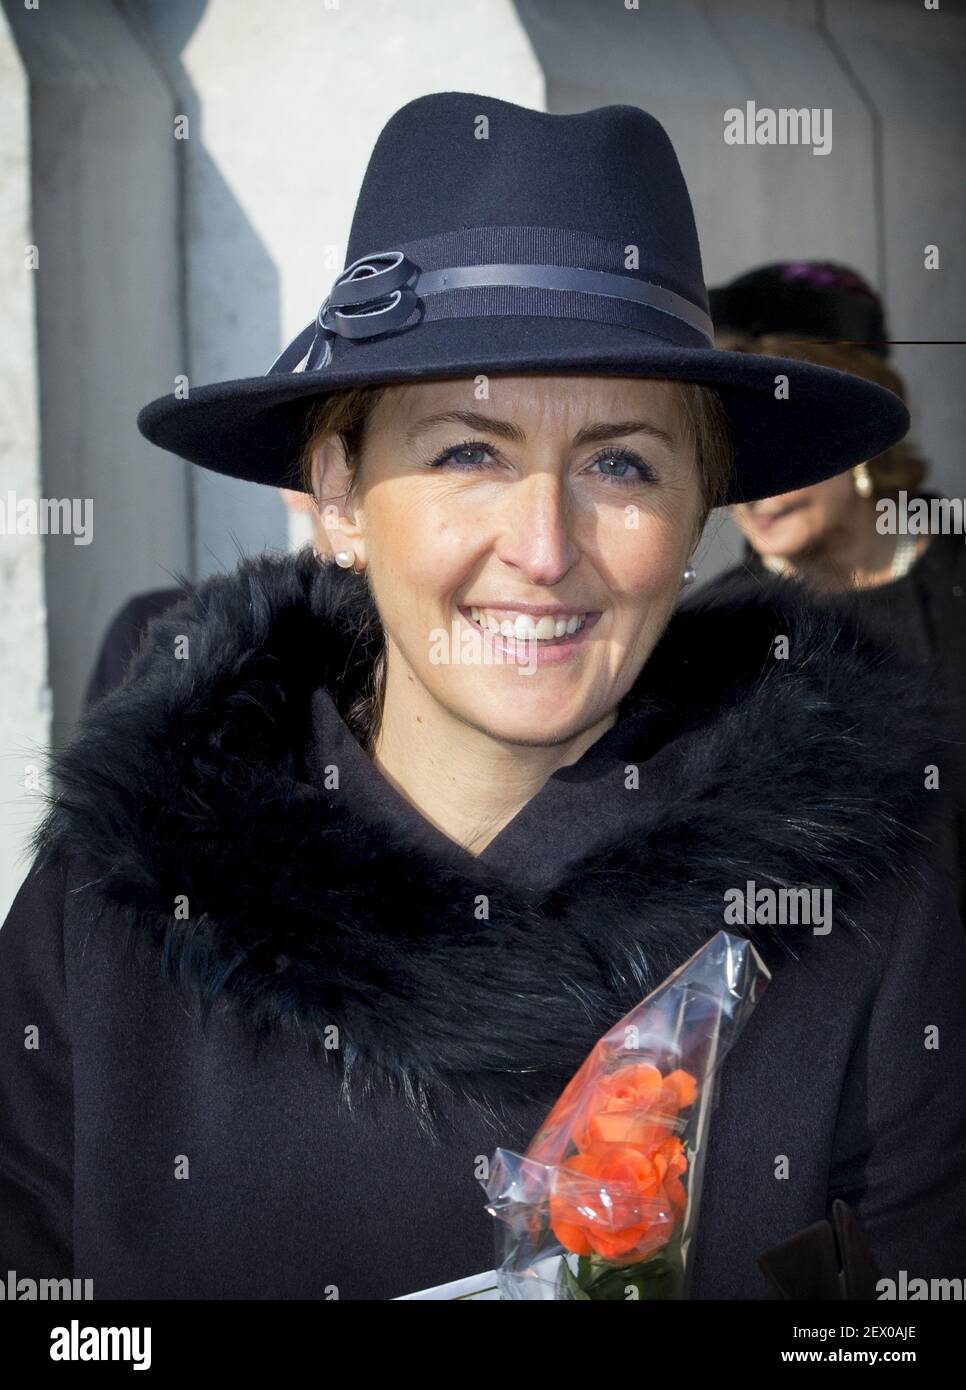 Princess Claire at a mass to commemorate the deceased members of the Belgian royal family at the Onze-Lieve-Vrouwkerk in Laken, Brussel. Feb. 12, 2015 *** Please Use Credit from Credit Field *** Stock Photo